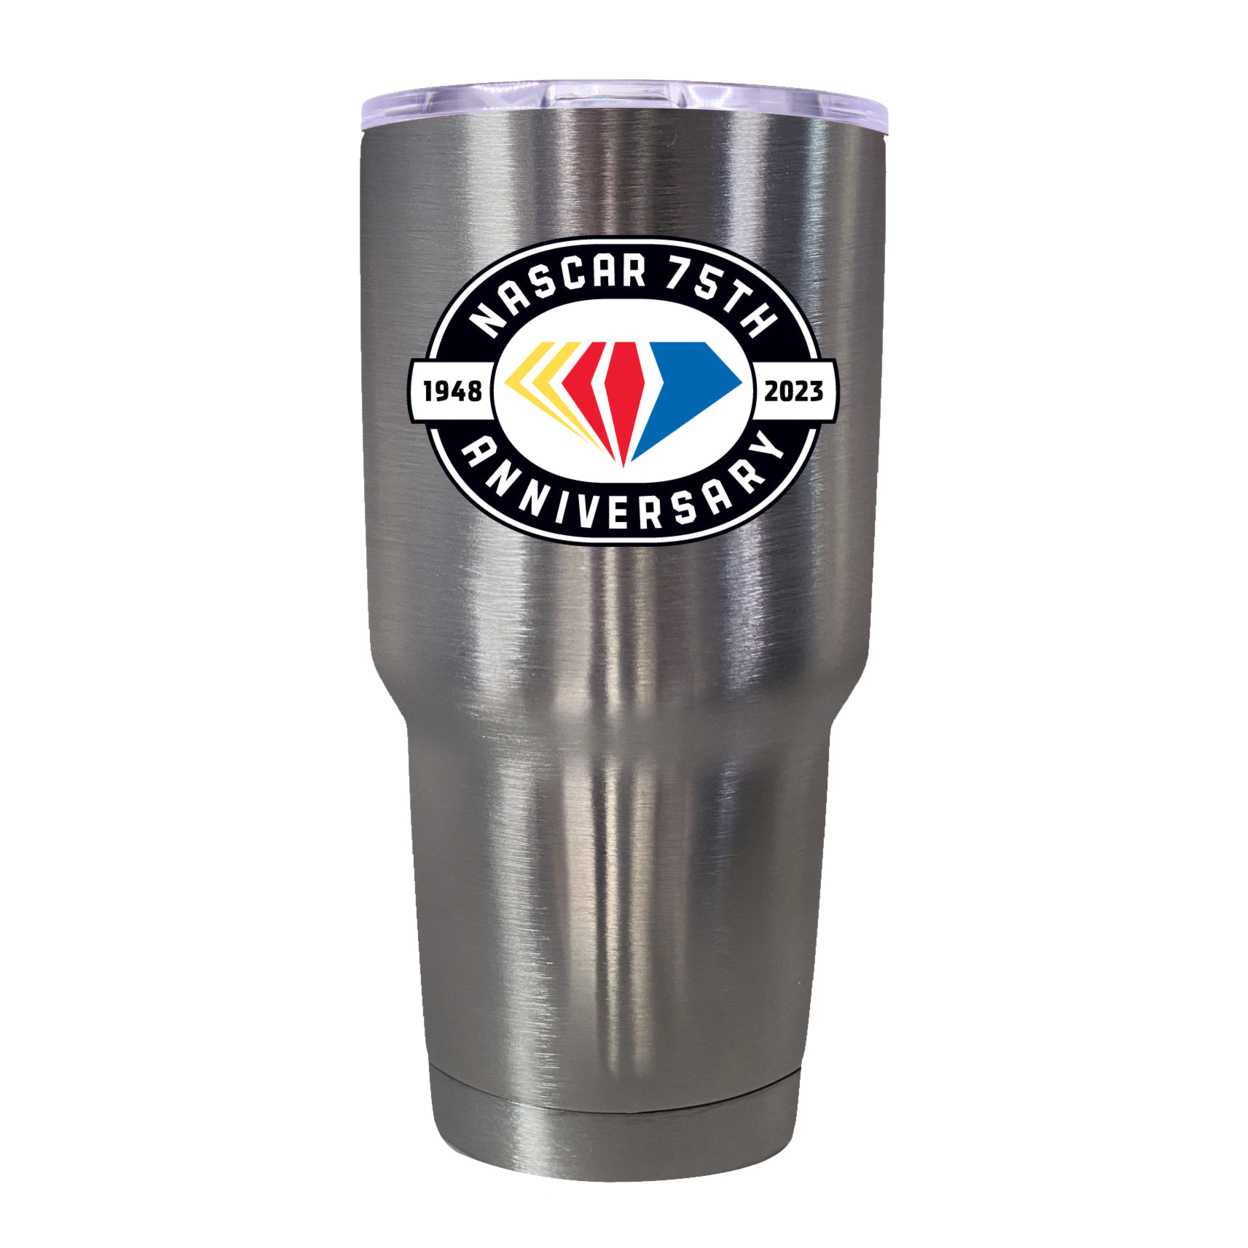 NASCAR 75 Year Anniversary Officially Licensed 24oz Stainless Steel Tumbler - Stainless Steel